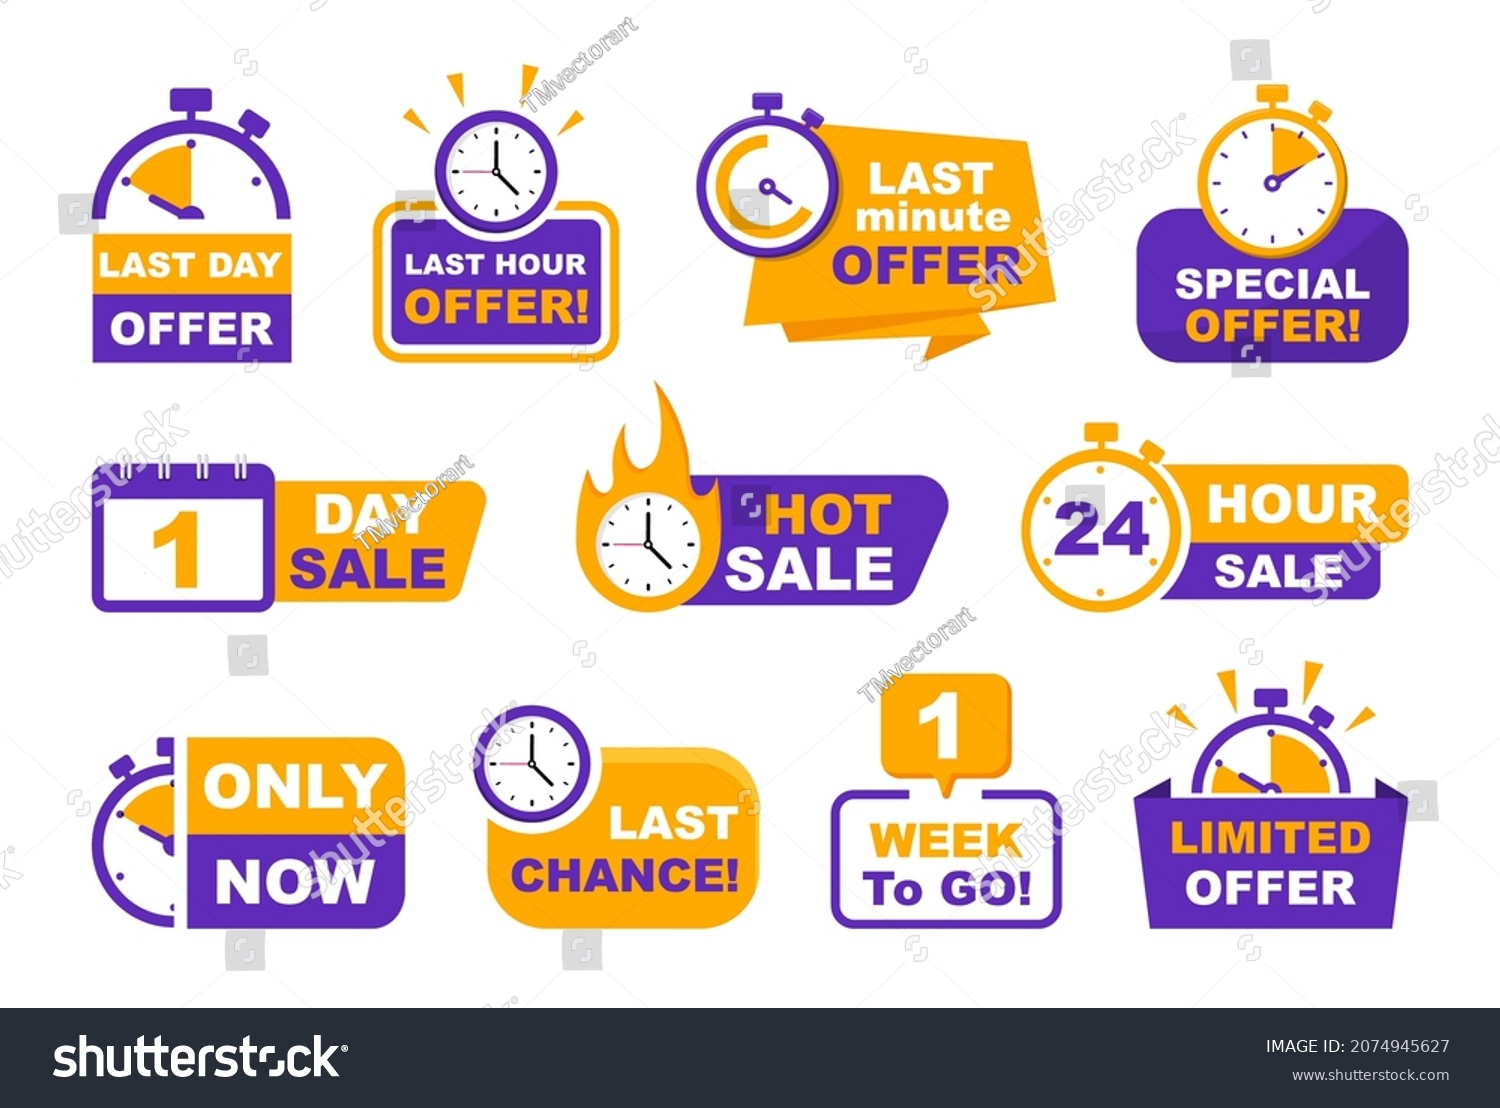 SVG of Set of sale countdown badges. Sale timer banners. Last day, last hour and last minute offer. One day, 24 hour and one week to go sale. Promo stickers hot sale and last chance. svg